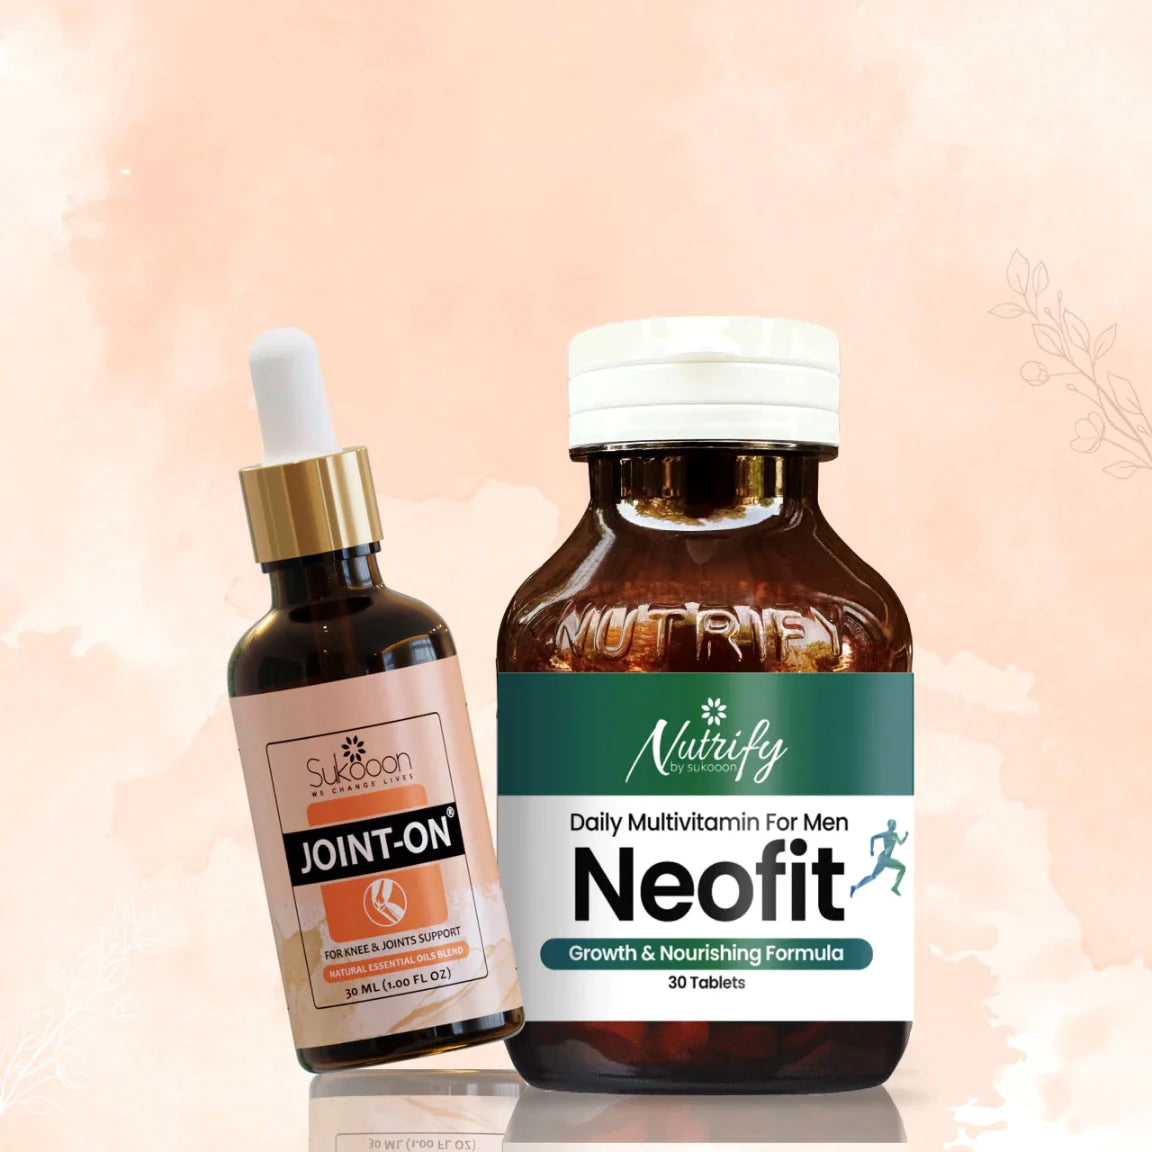 Joint-On (30ML) Essential Oil + Neofit Tablets